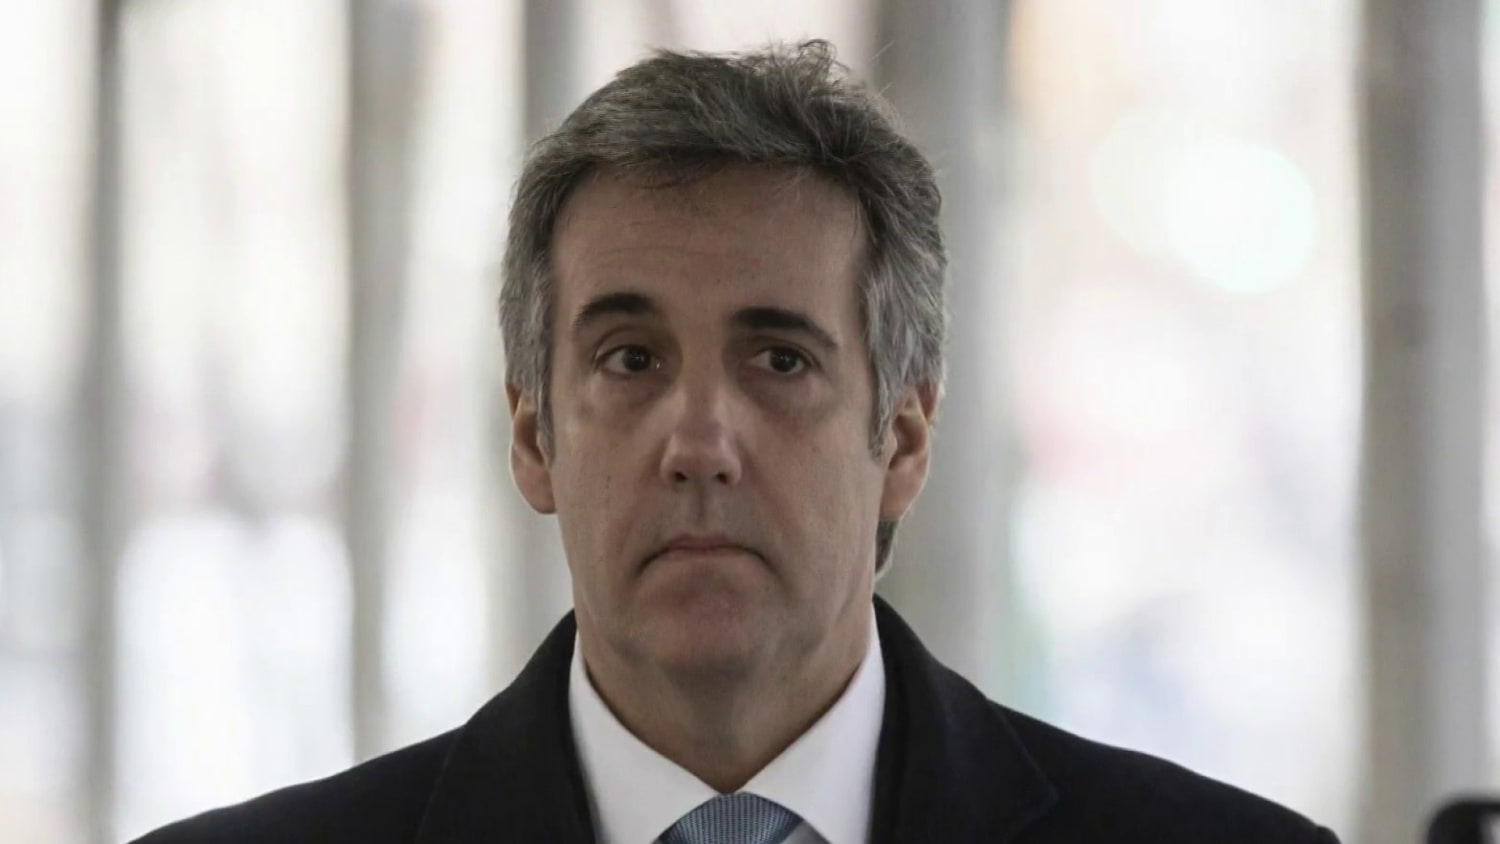 Michael Cohen set to testify as key witness in Trump hush money trial